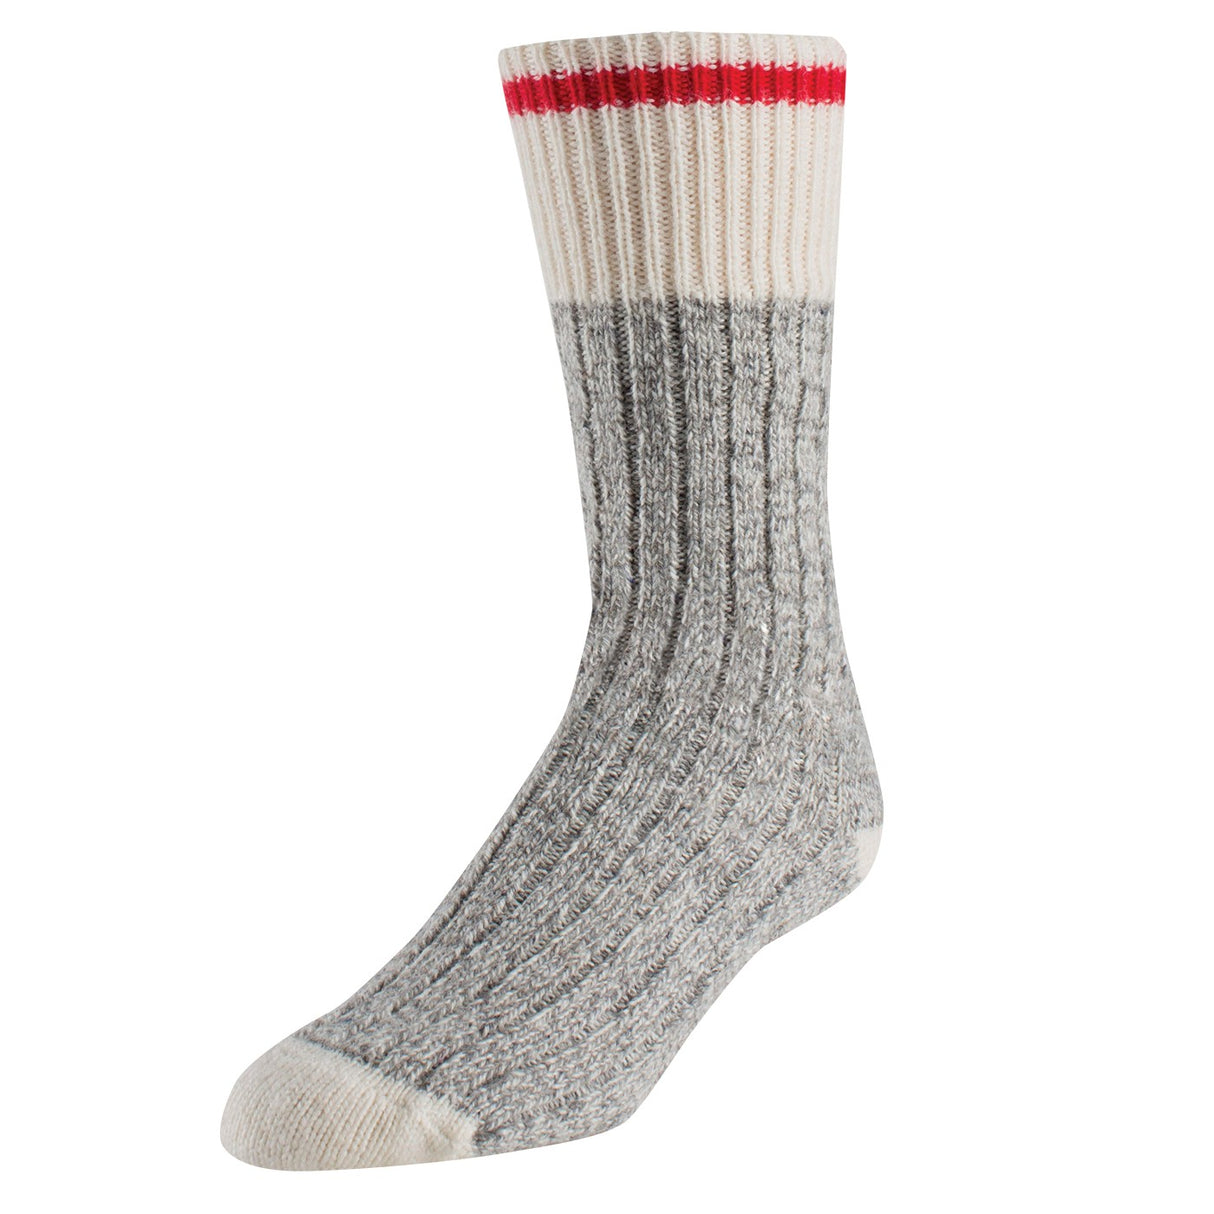 Duray Boreal Classic Chaussettes d'hiver thermiques